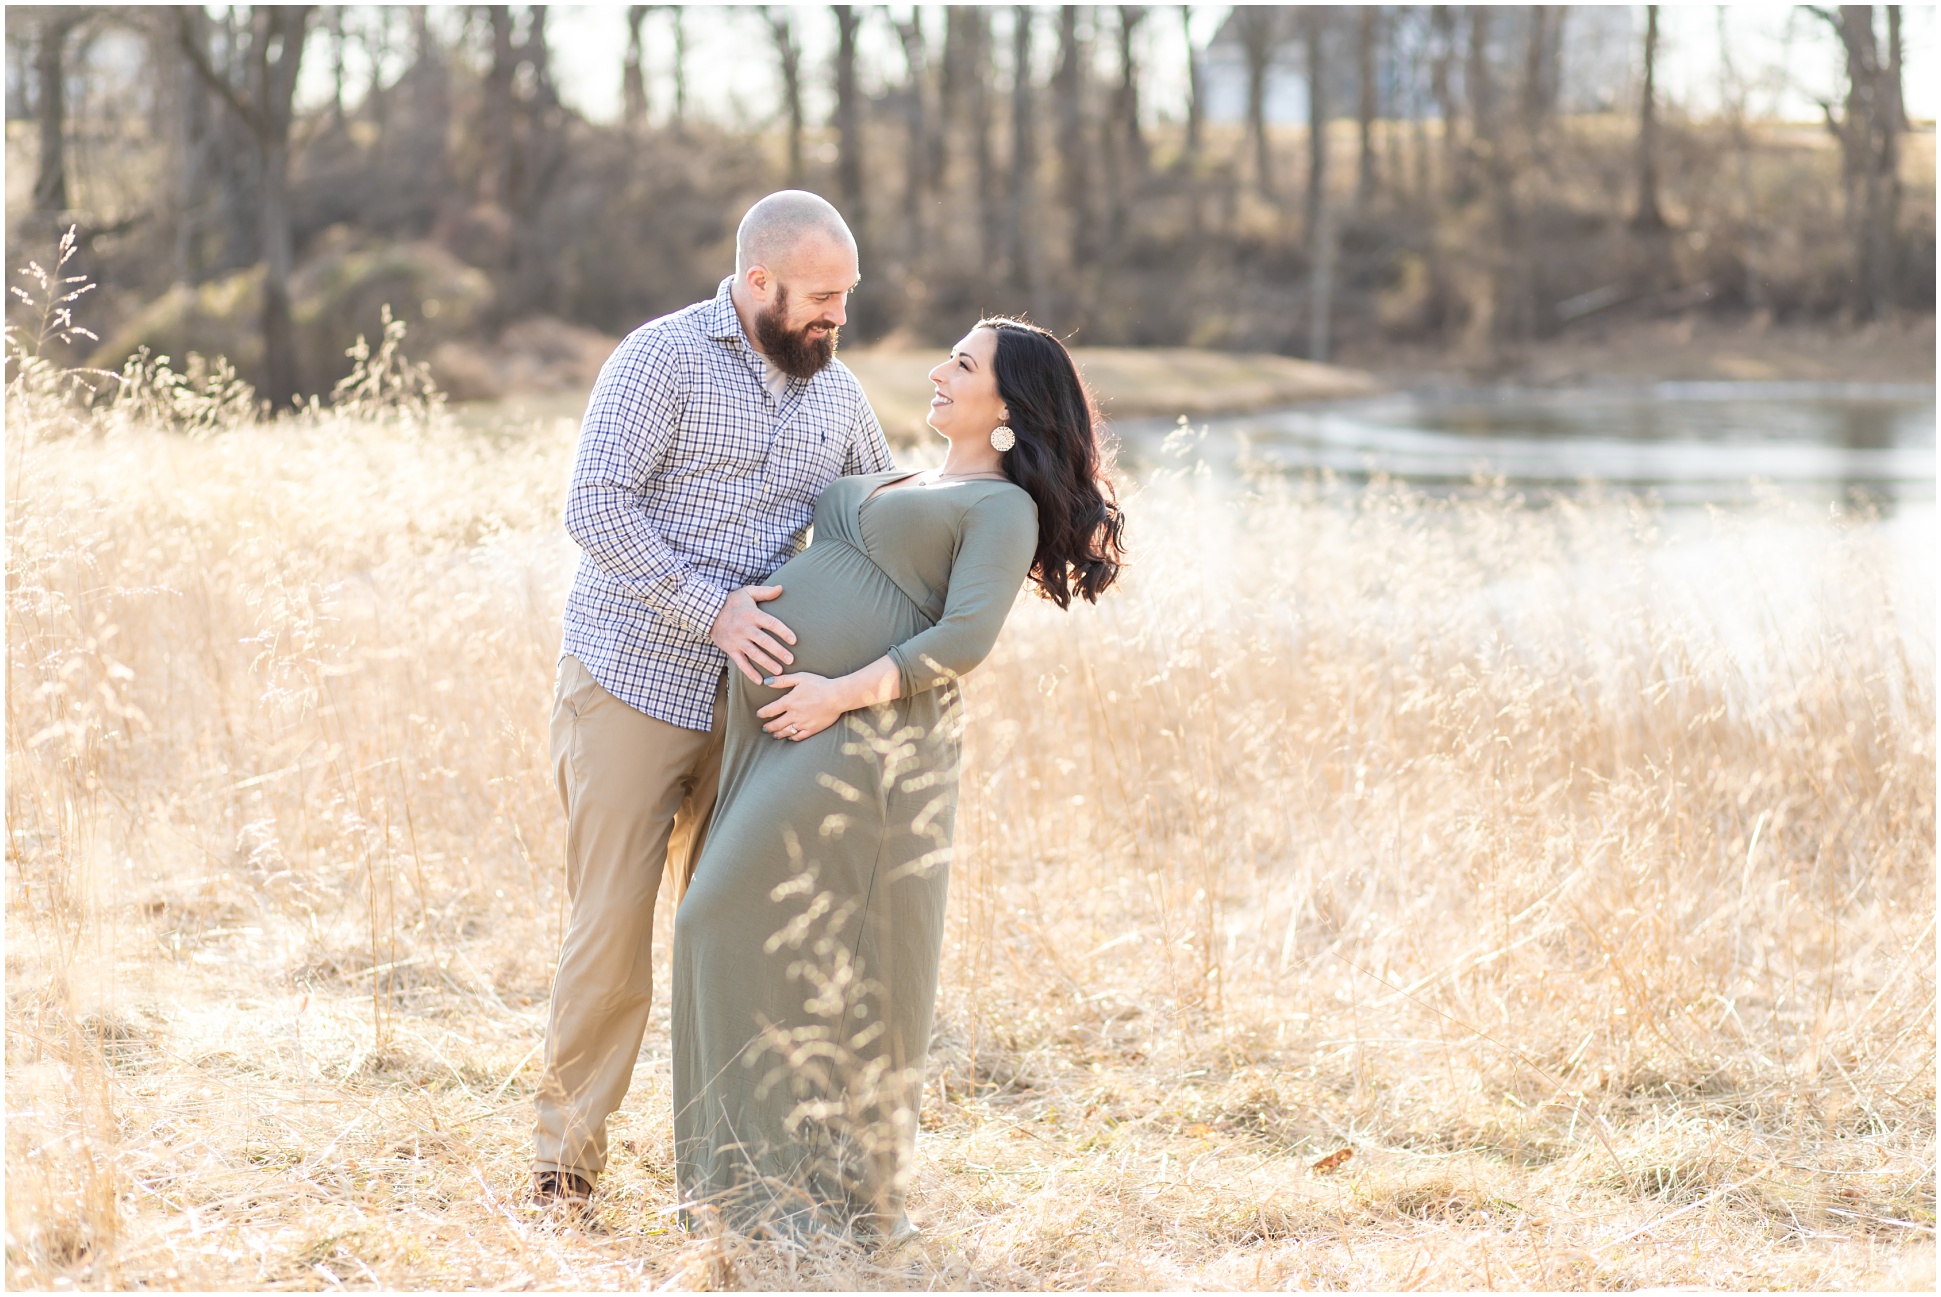 Husband dipping pregnant wife back in a field of tall grass